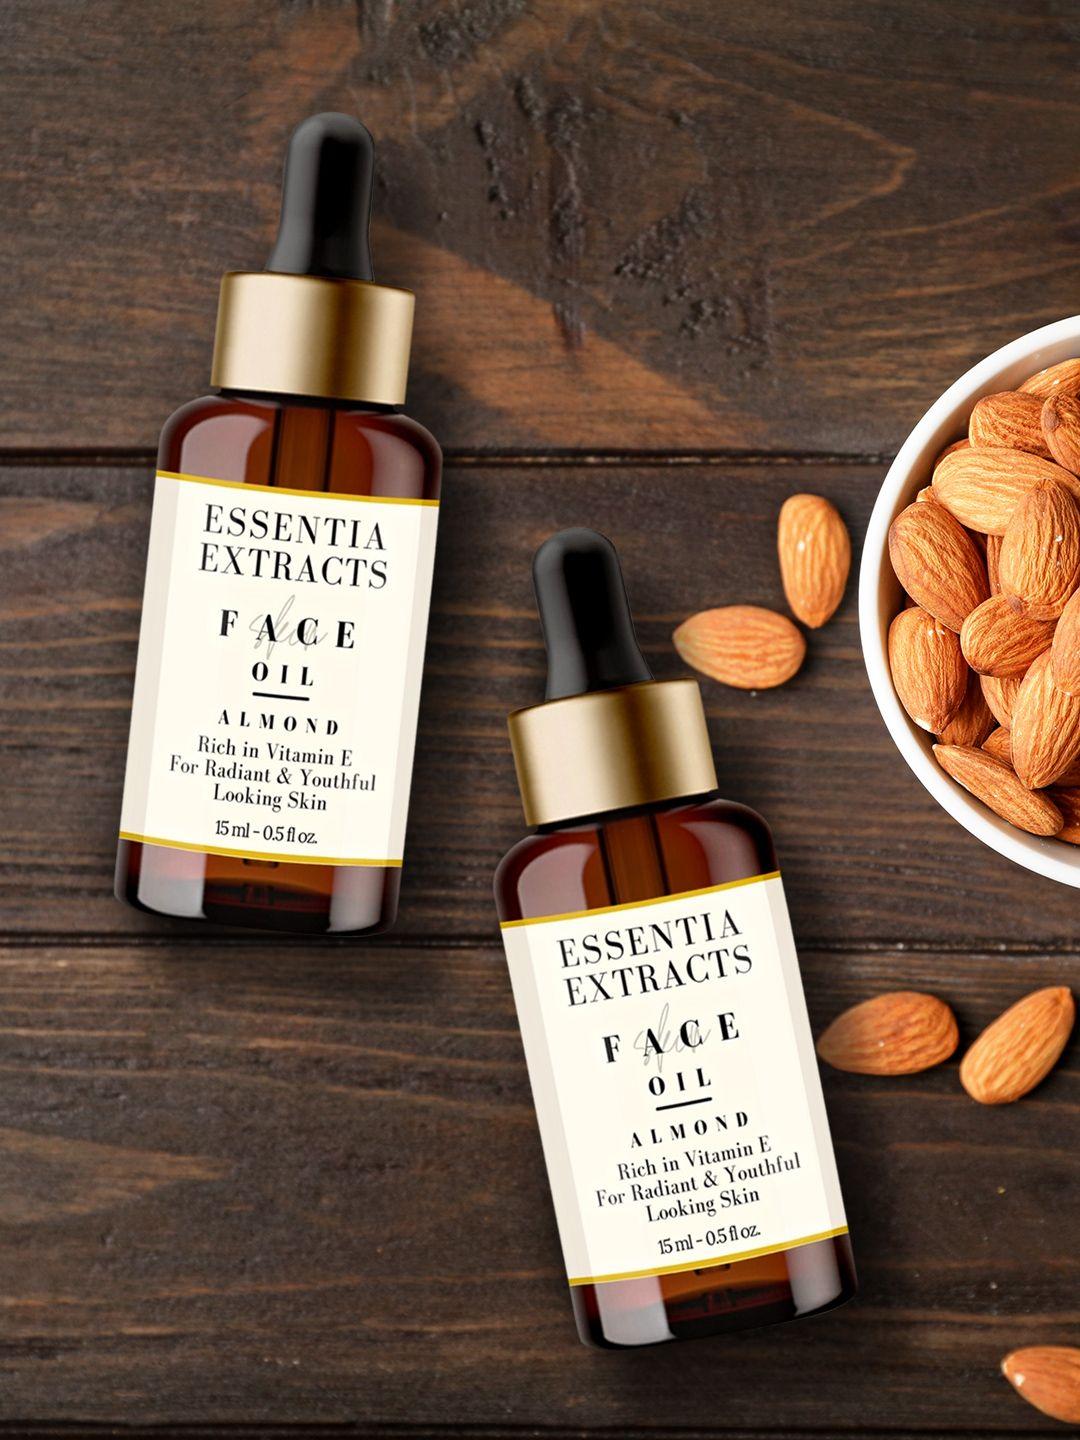 essentia extracts pack of 2 almond skin brigening facial oil - 15 ml each